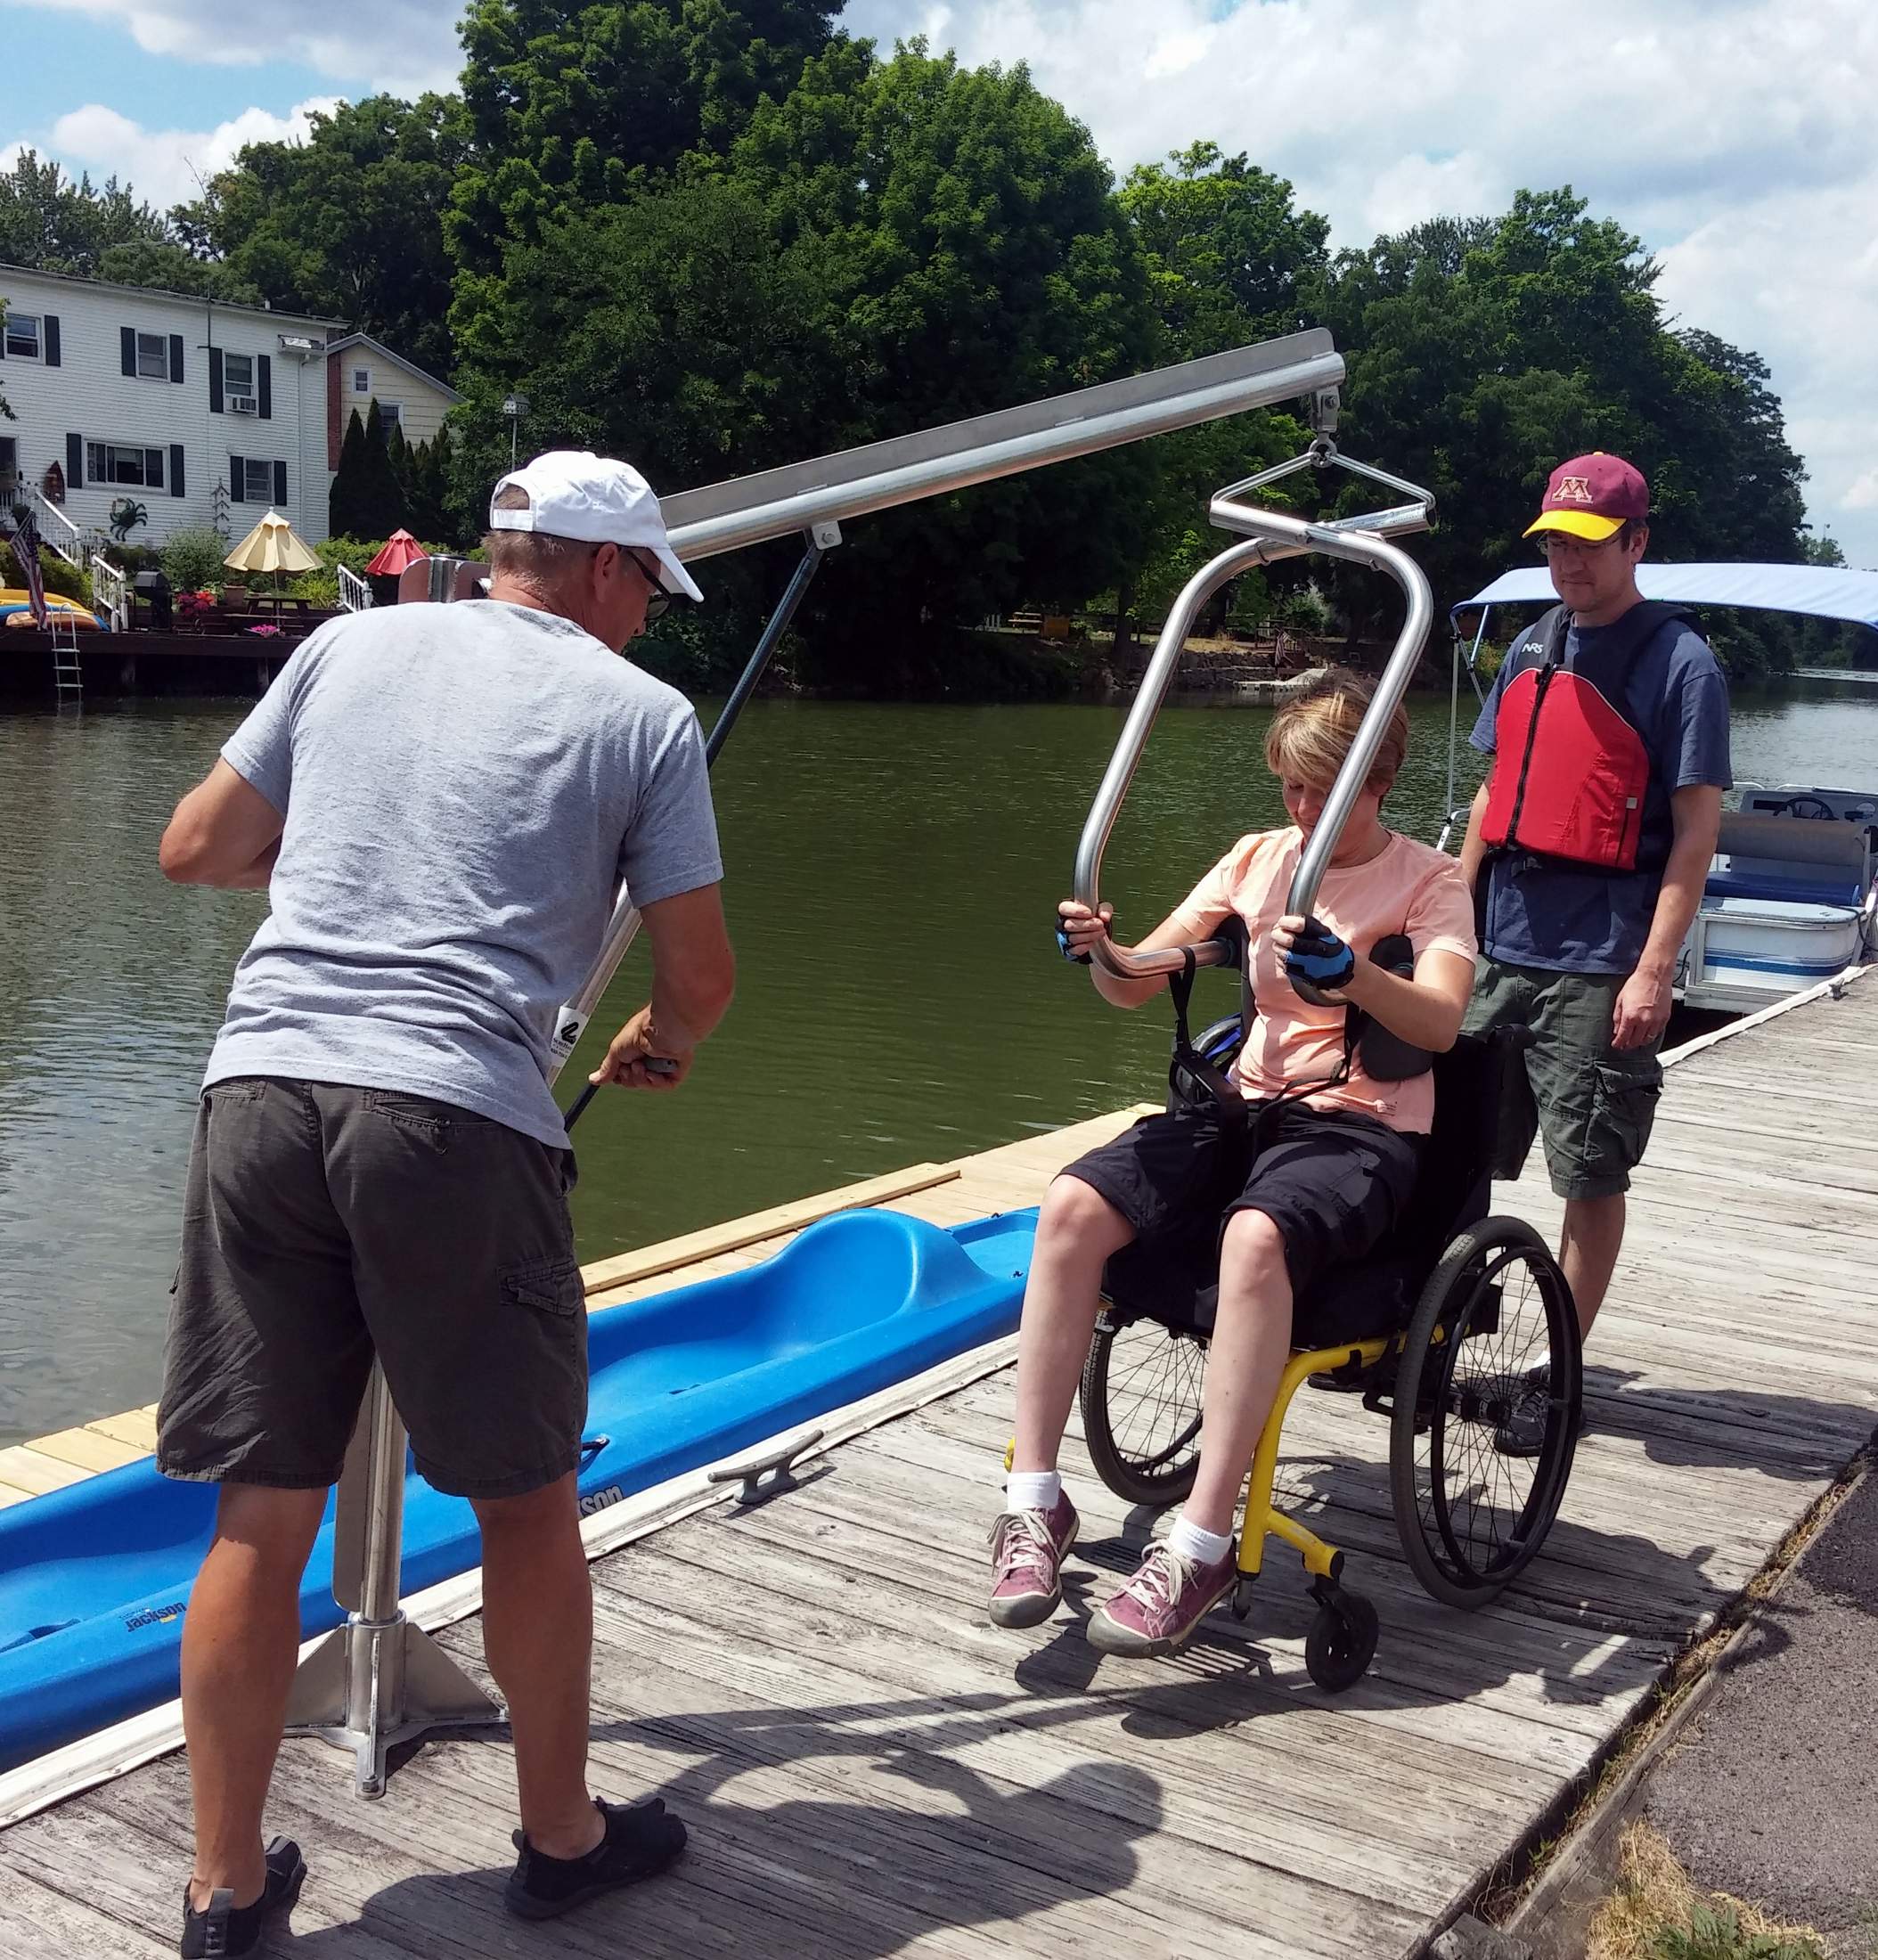 A woman sits in her manual wheelchair and has the arms of a hoyer lift (mounted on a dock) under her shoulders. A man is pumping the hydraulic lift to transfer her into a blue kayak that is waiting on a side dock. A man stands behind the woman in a lift jacket.